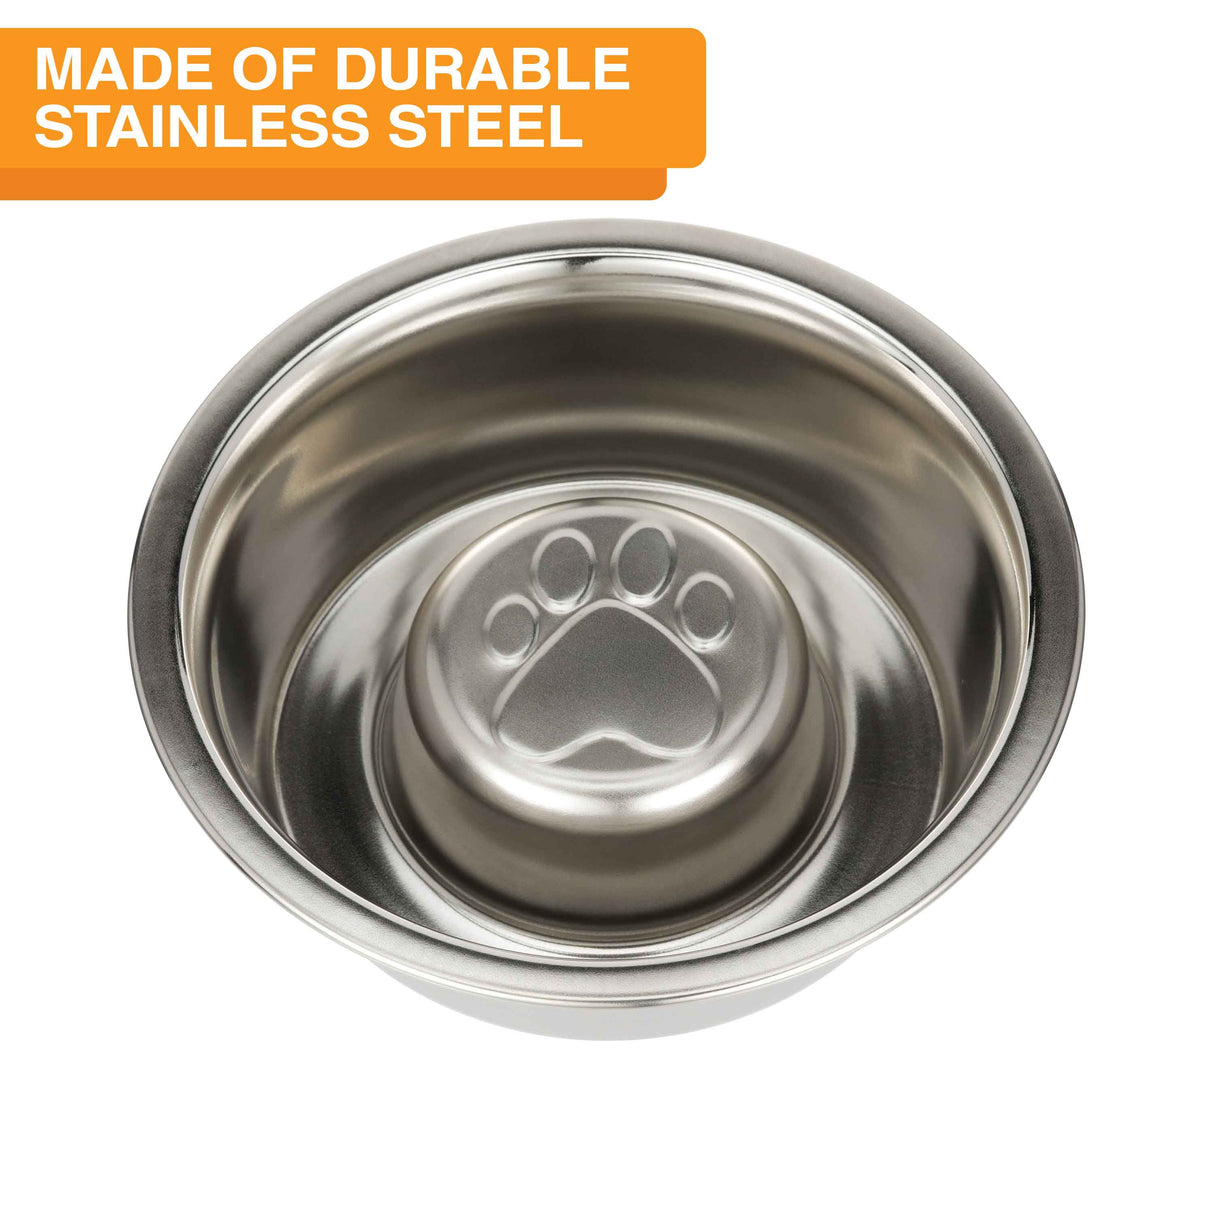 Made of durable stainless steel